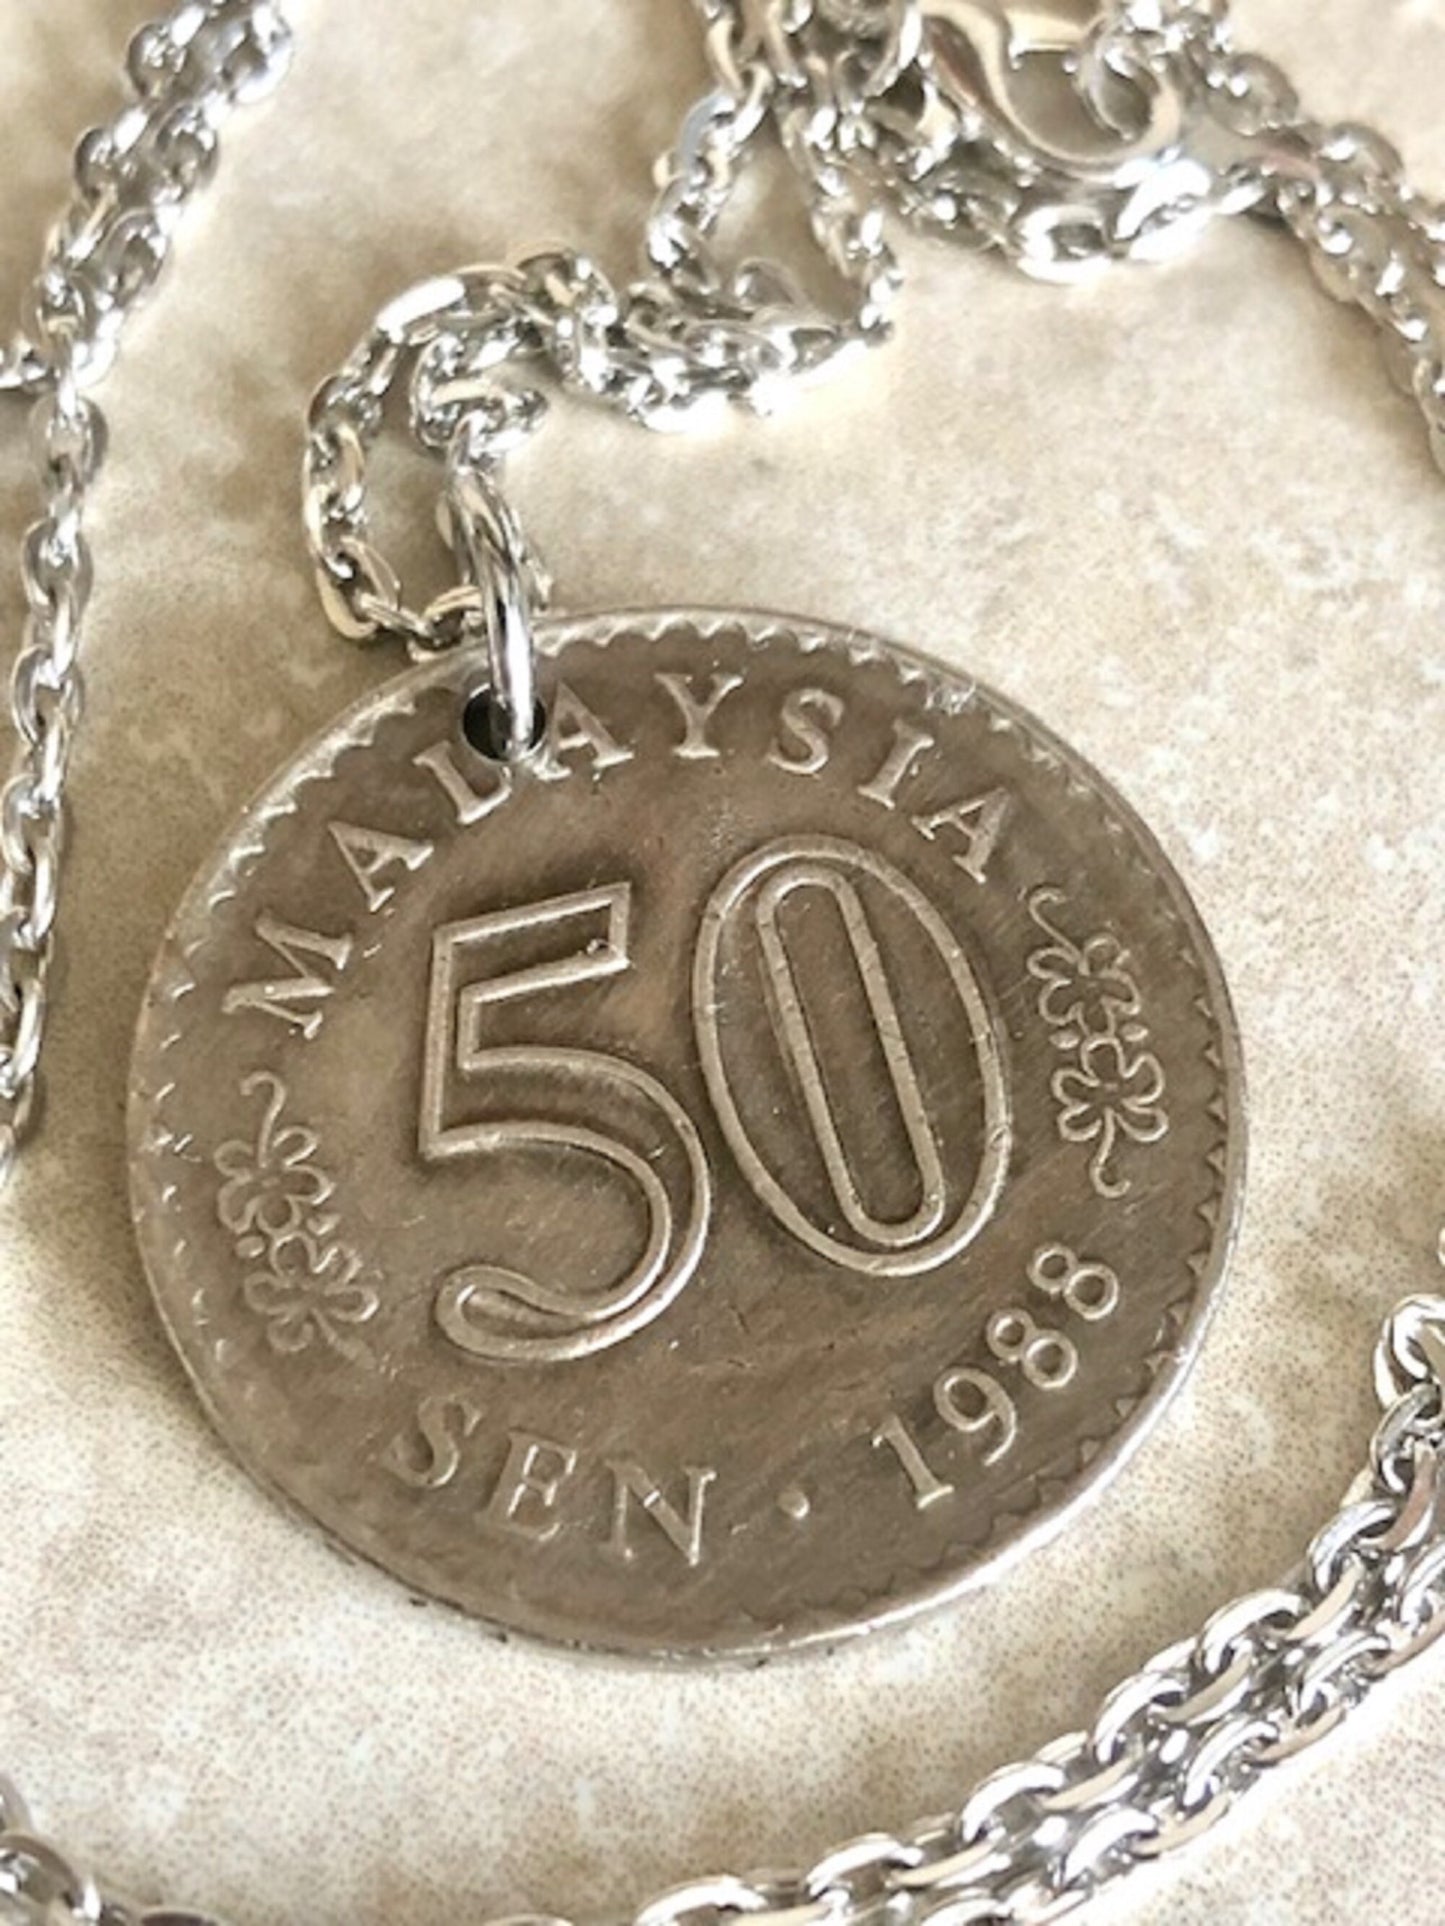 Malaysia Coin Fifty Sen Pendant Necklace Personal Necklace Old Vintage Handmade Jewelry Gift Friend Charm For Him Her World Coin Collector